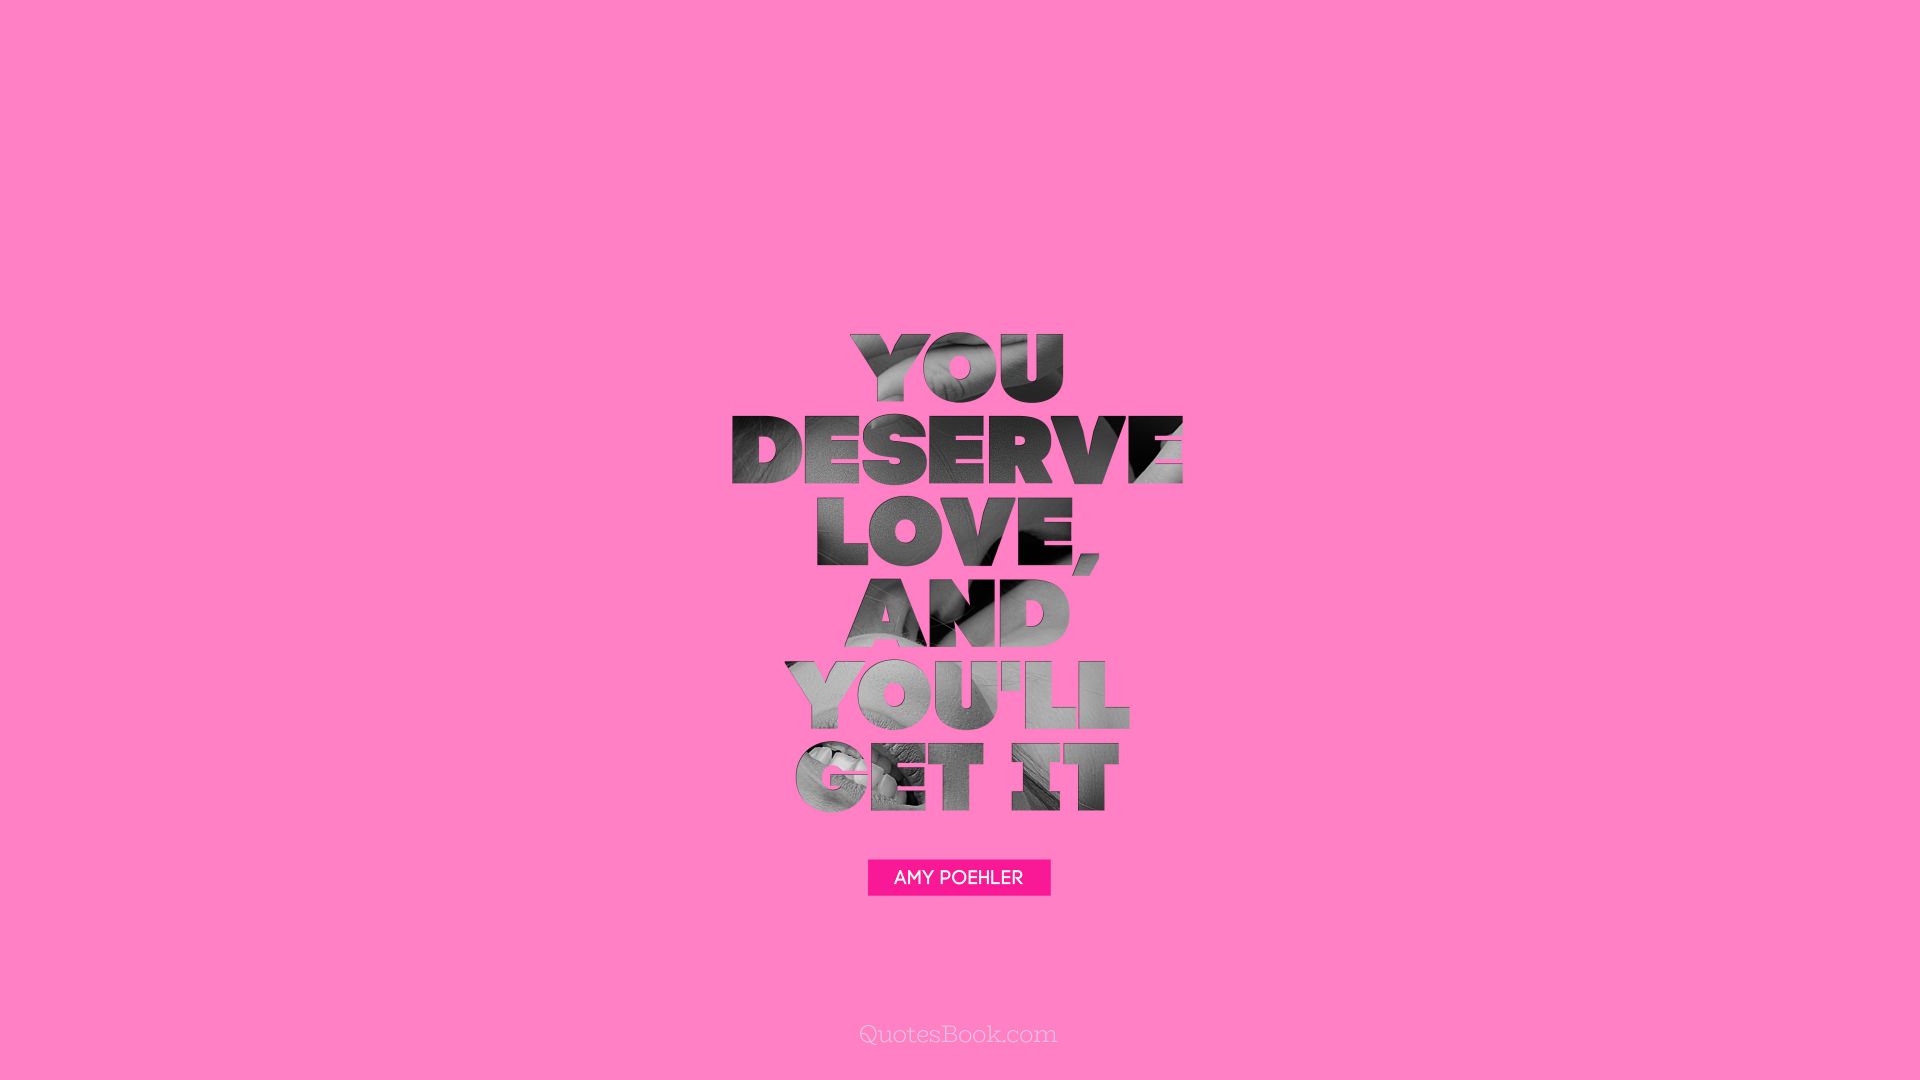 If you deserve love, and you'll get it. - Quote by Amy Poehler